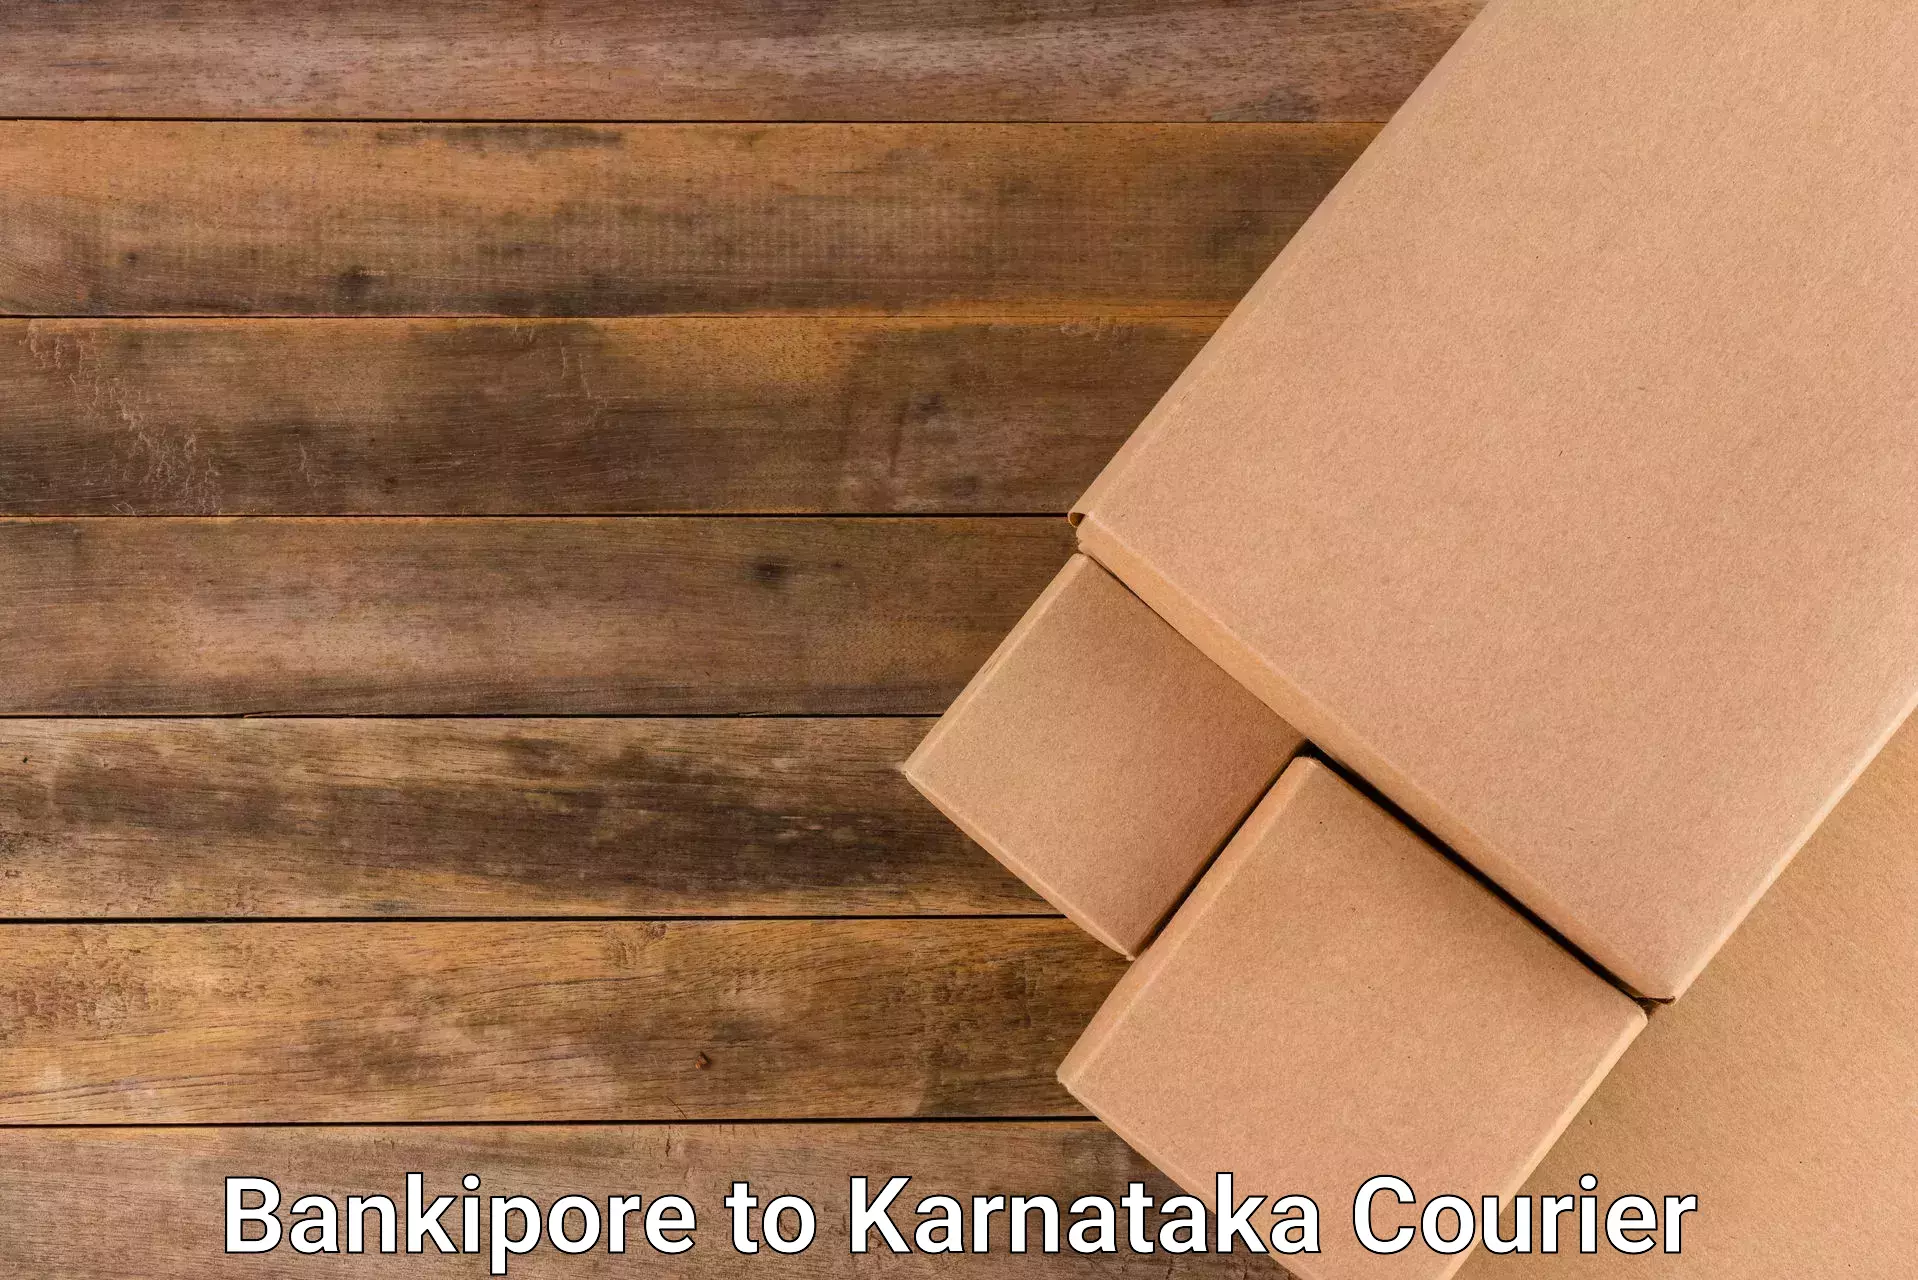 Package delivery network Bankipore to Gokak